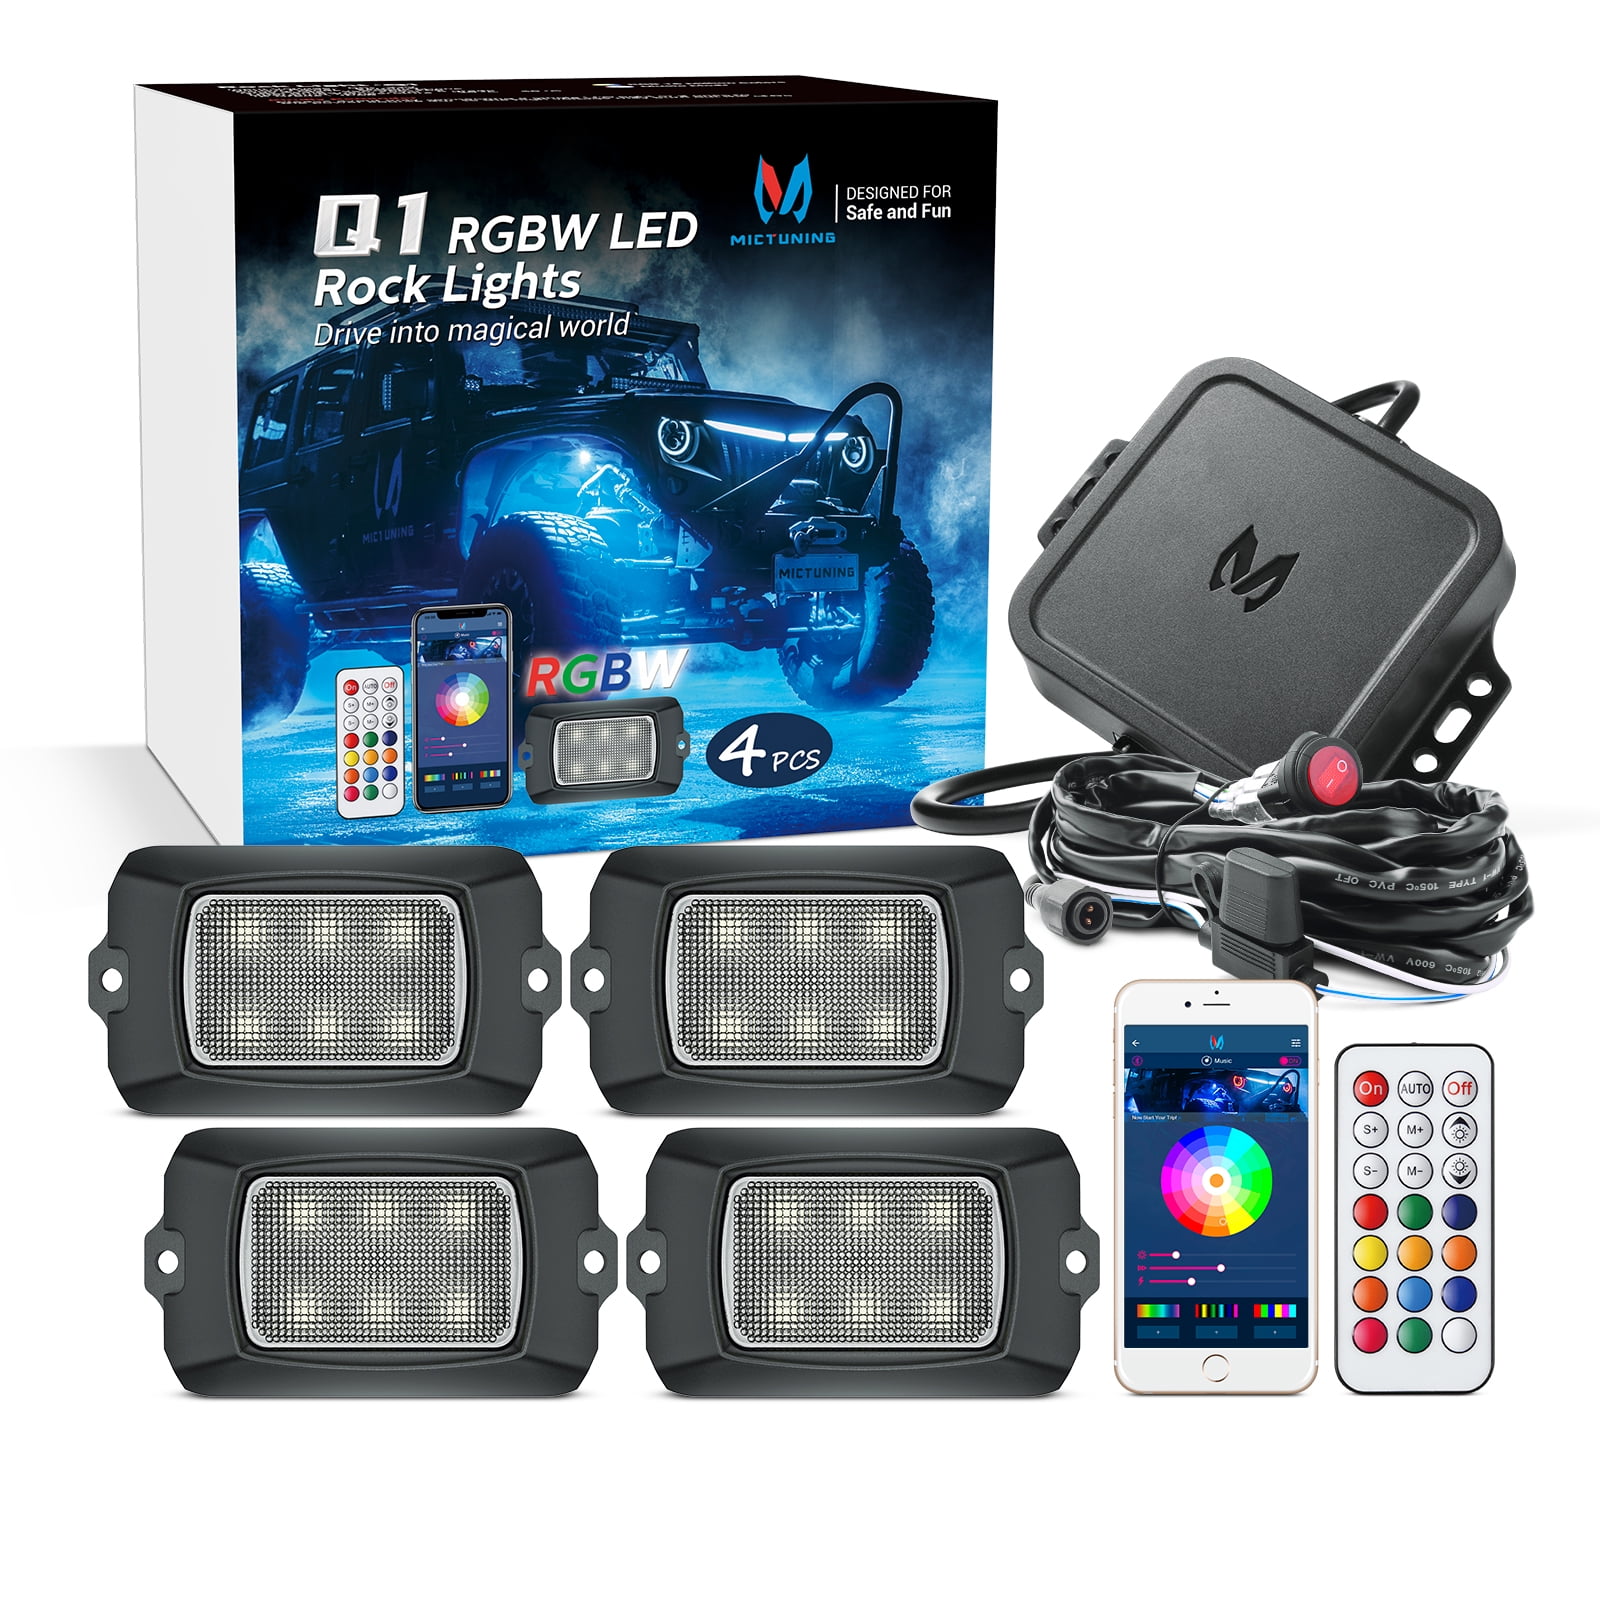 Music Mode 8 Pods Multicolor Underglow Neon Light Waterproof Underbody Lighting Kit with APP Control Remote Control MICTUNING Q1 RGB LED Rock Lights 